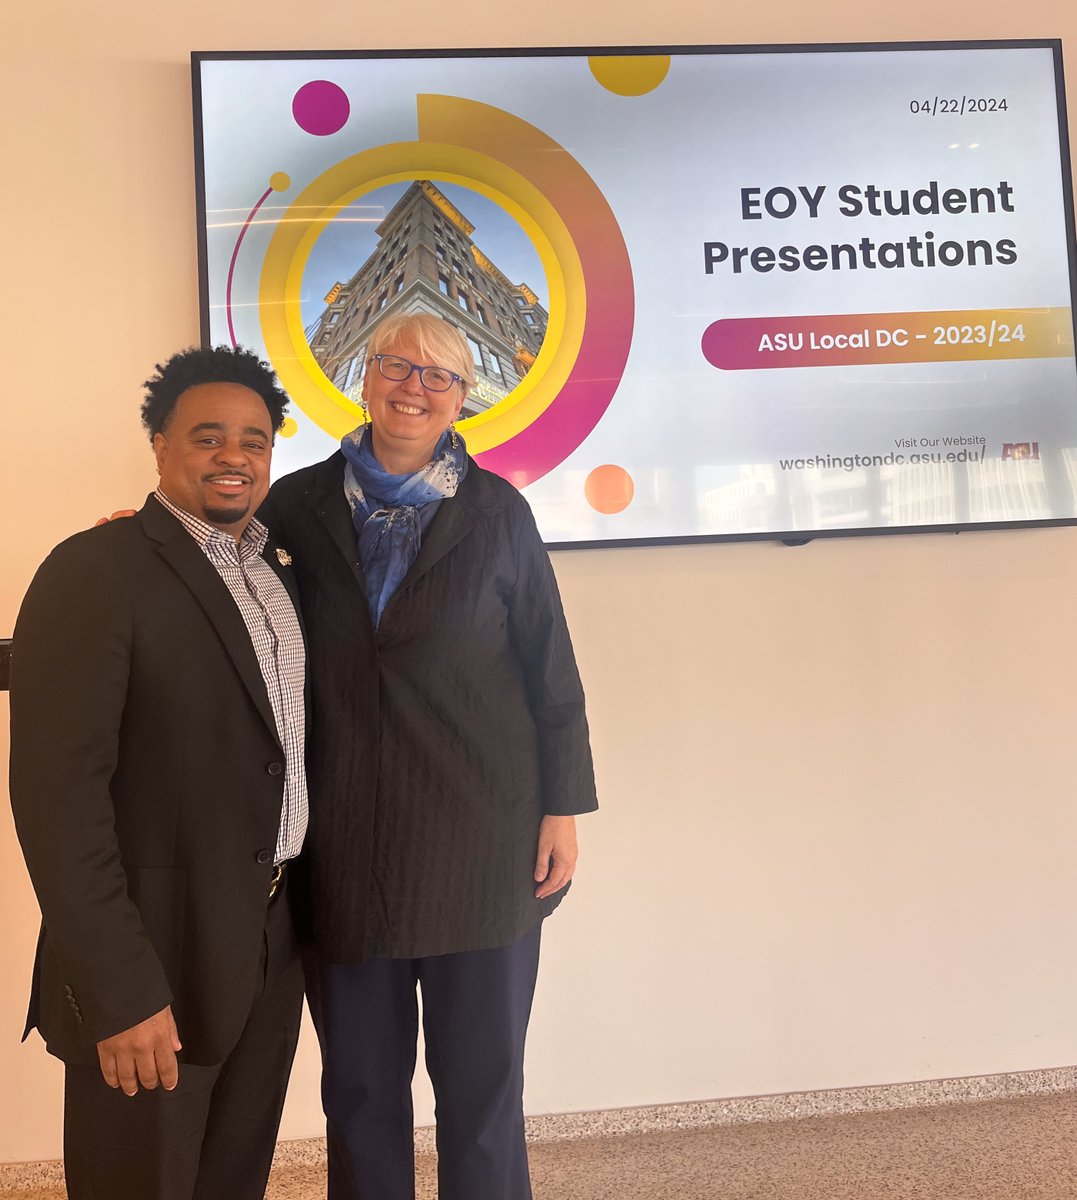 Yesterday, the ASU Local DC program students had the opportunity to showcase their final presentations to a panel of judges. Each cohort has a distinct focus on career development and readiness skills in their intended field of work. CityWorks DC is proud to support ASU Local DC!